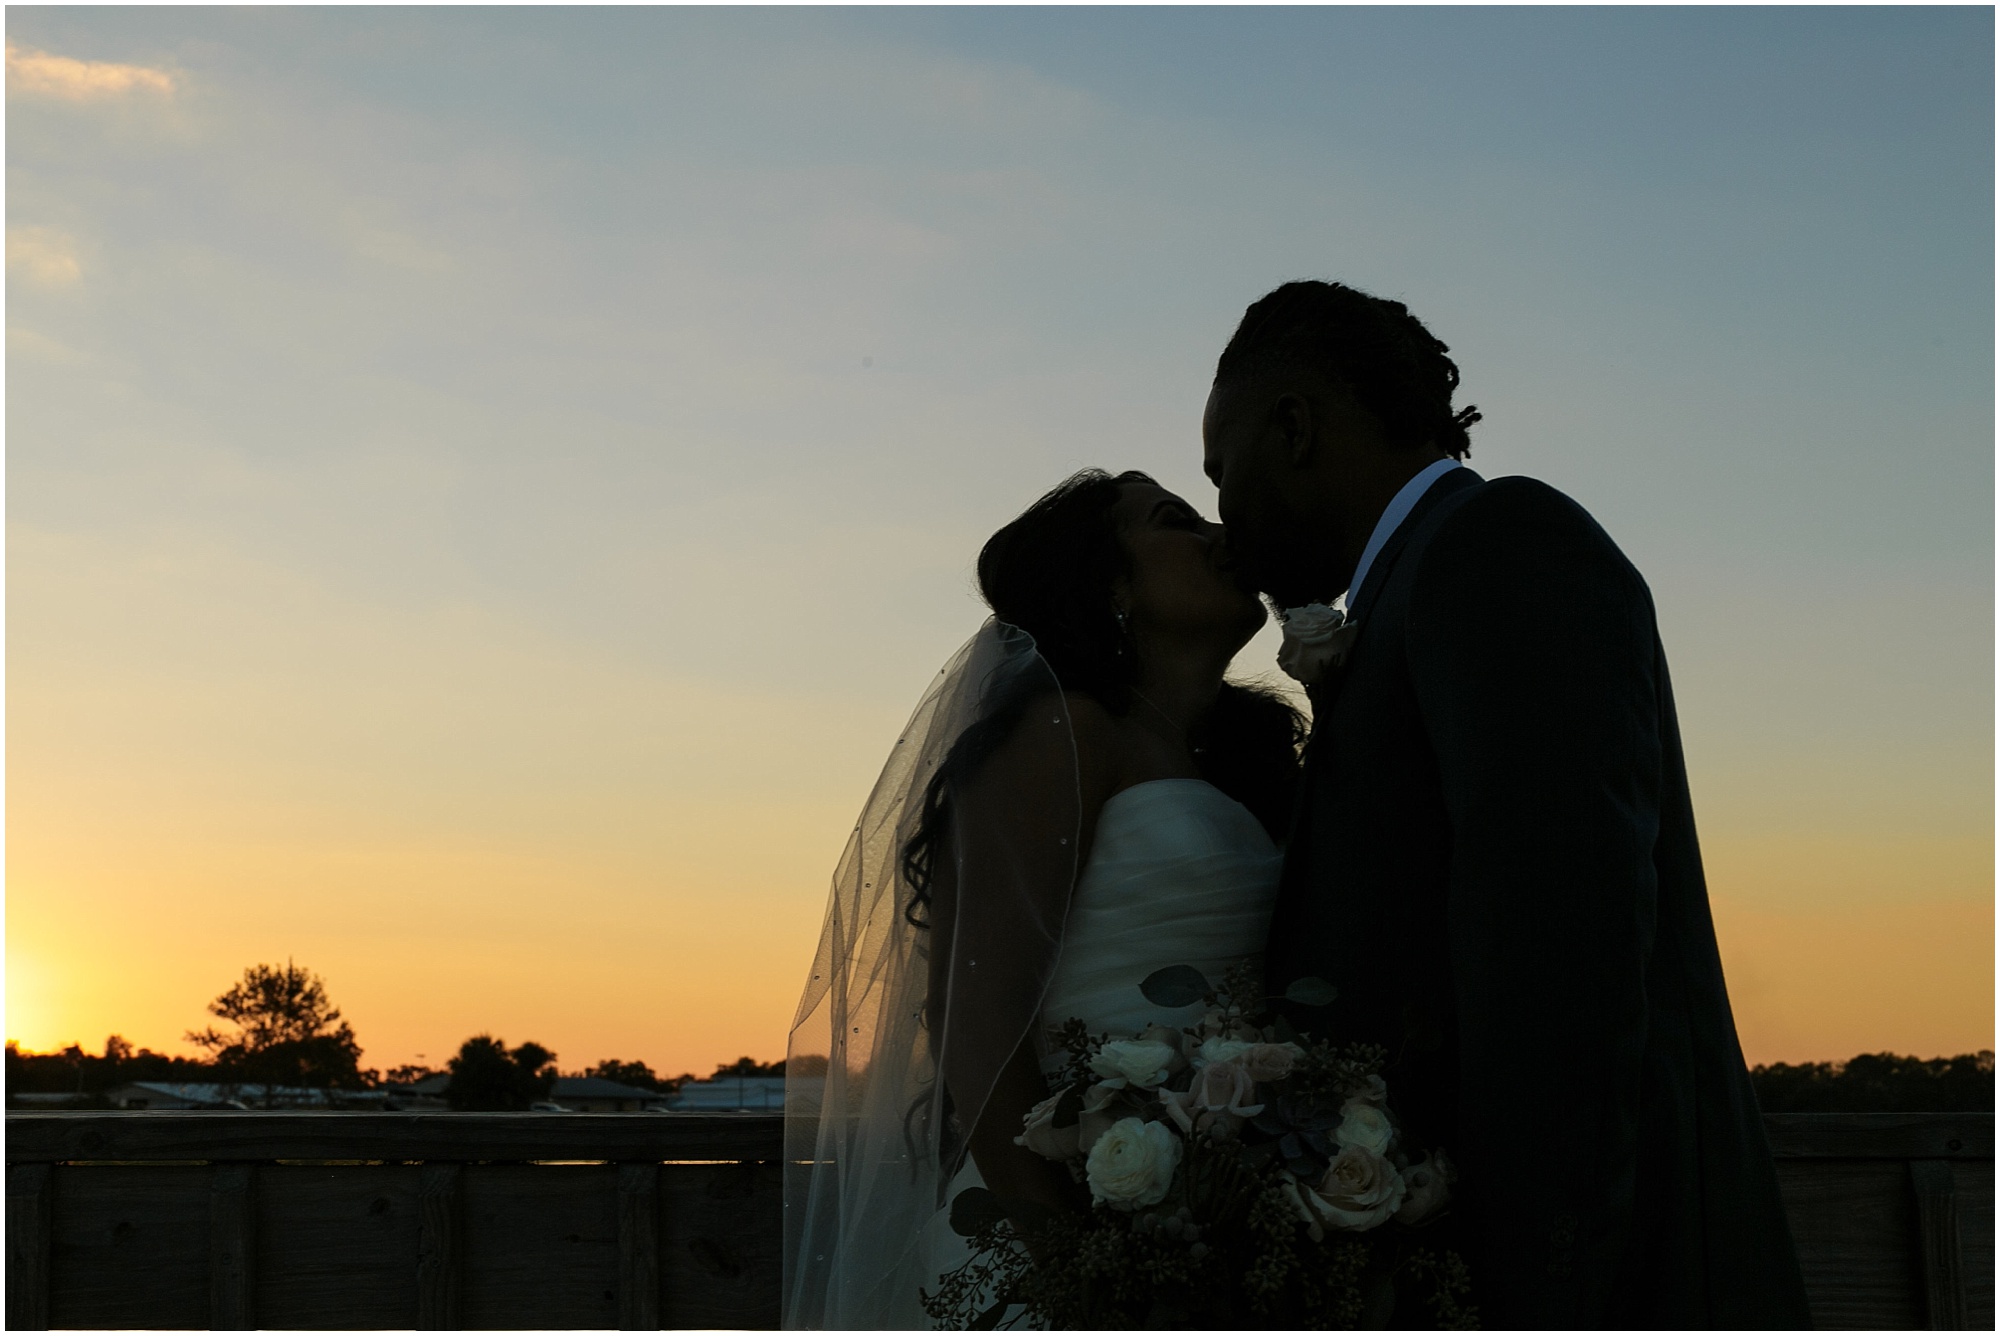 Silhouette of the bride and groom kissing in the sunset. 